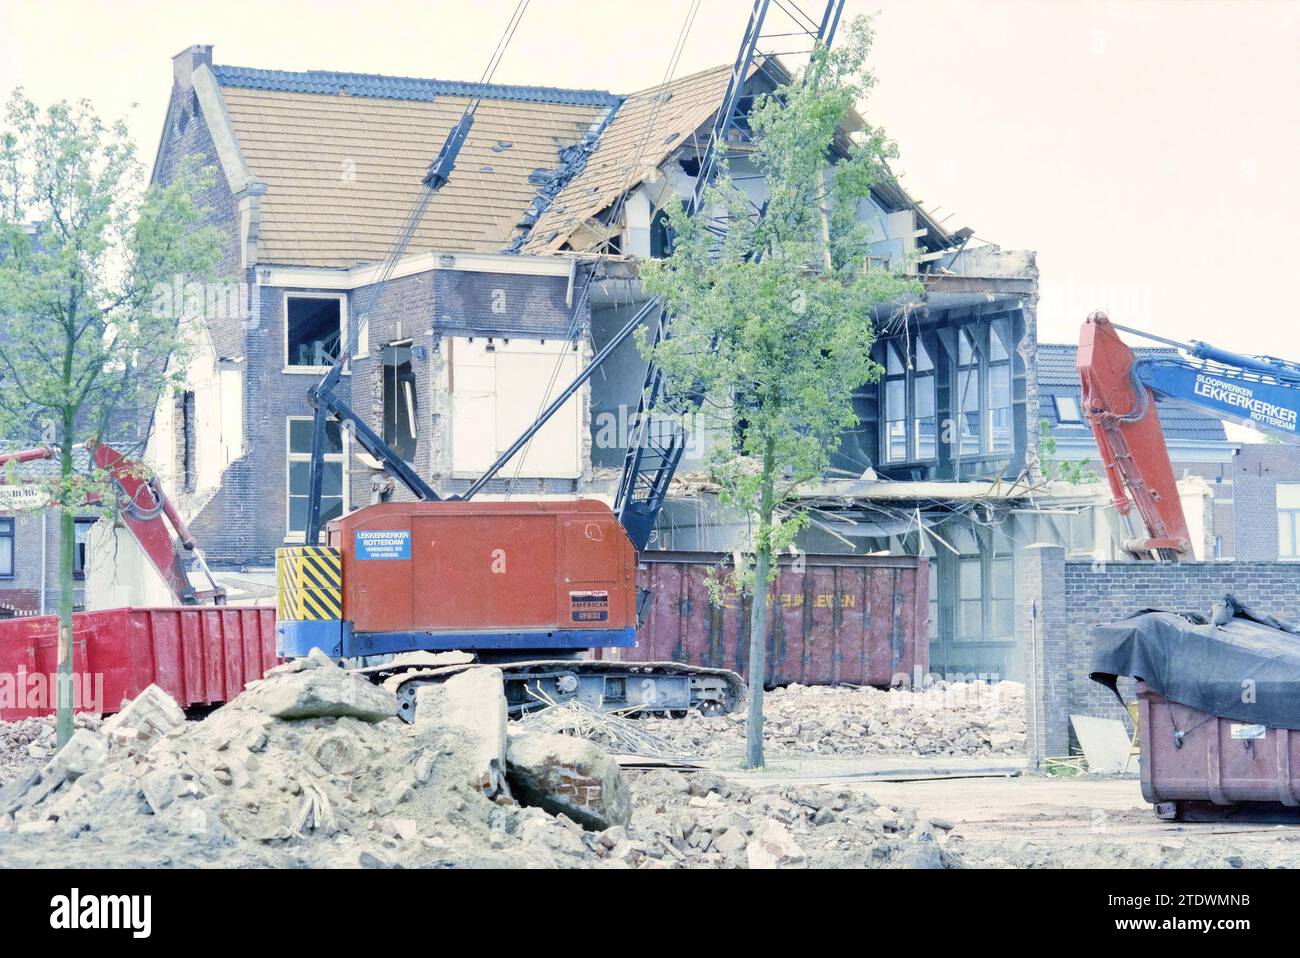 Demolition of J.H.V.U complex, 22-05-1996, Whizgle News from the Past, Tailored for the Future. Explore historical narratives, Dutch The Netherlands agency image with a modern perspective, bridging the gap between yesterday's events and tomorrow's insights. A timeless journey shaping the stories that shape our future Stock Photo